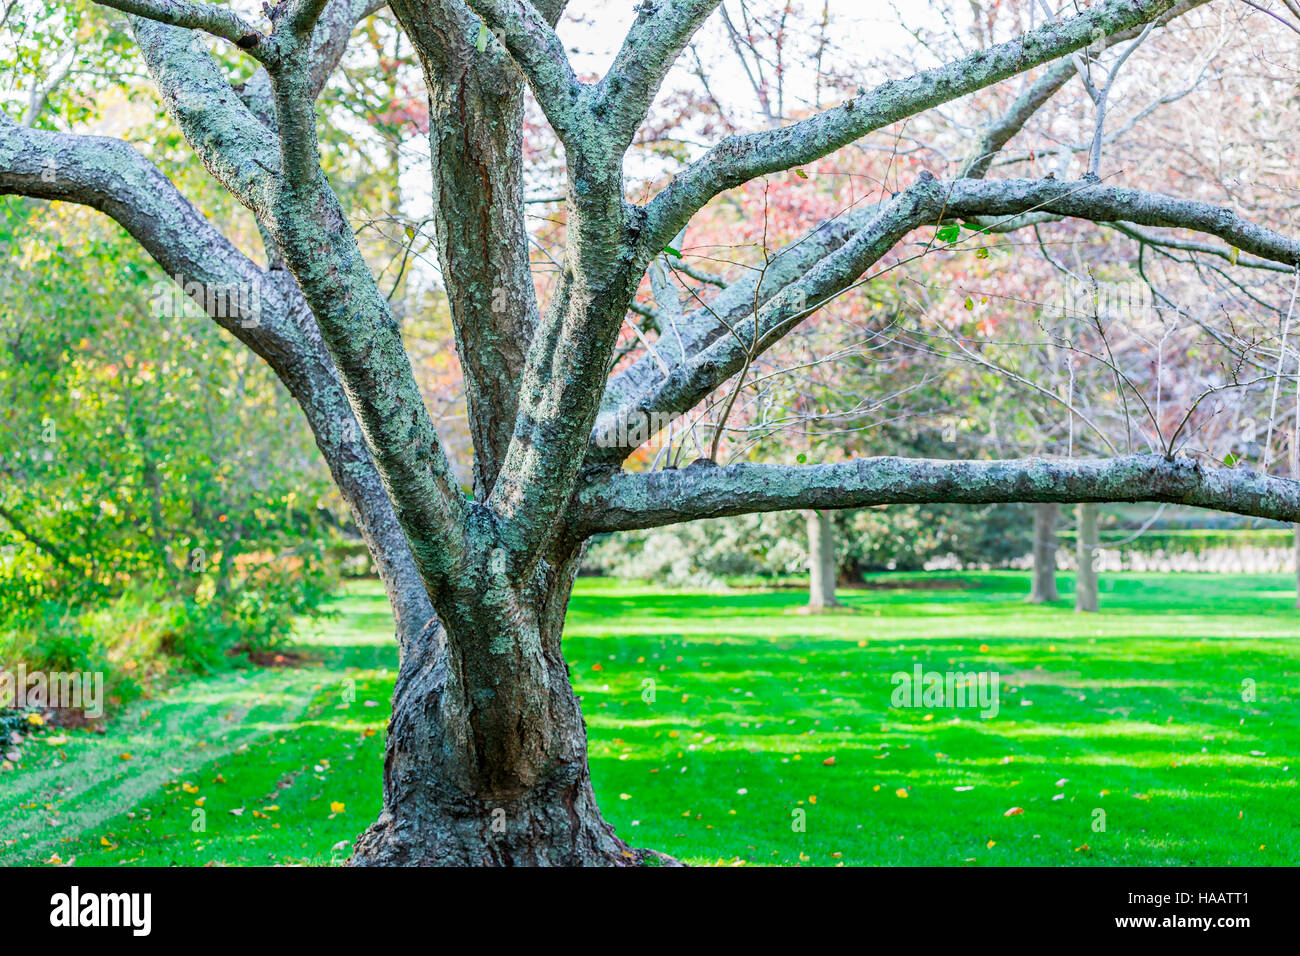 old tree growing in a manicured lawn with green grass Stock Photo